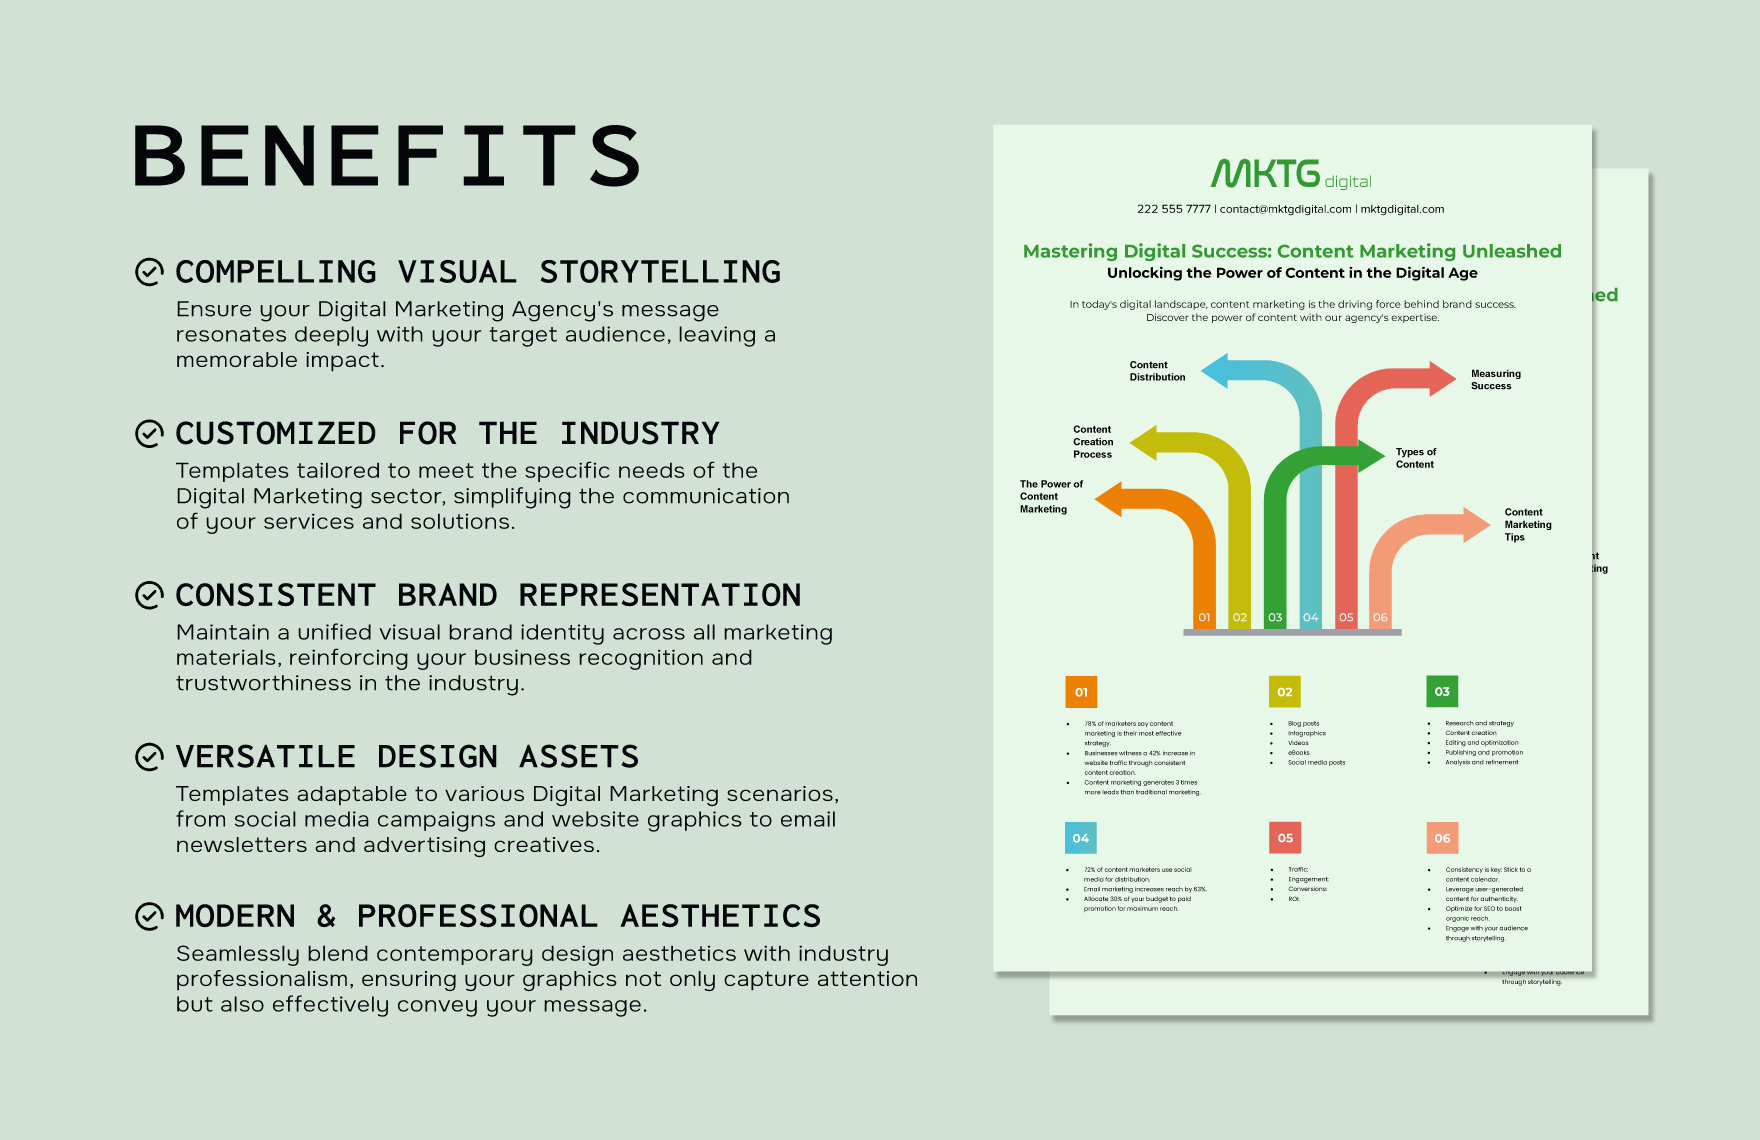 Digital Marketing Agency Content Marketing Infographic Template